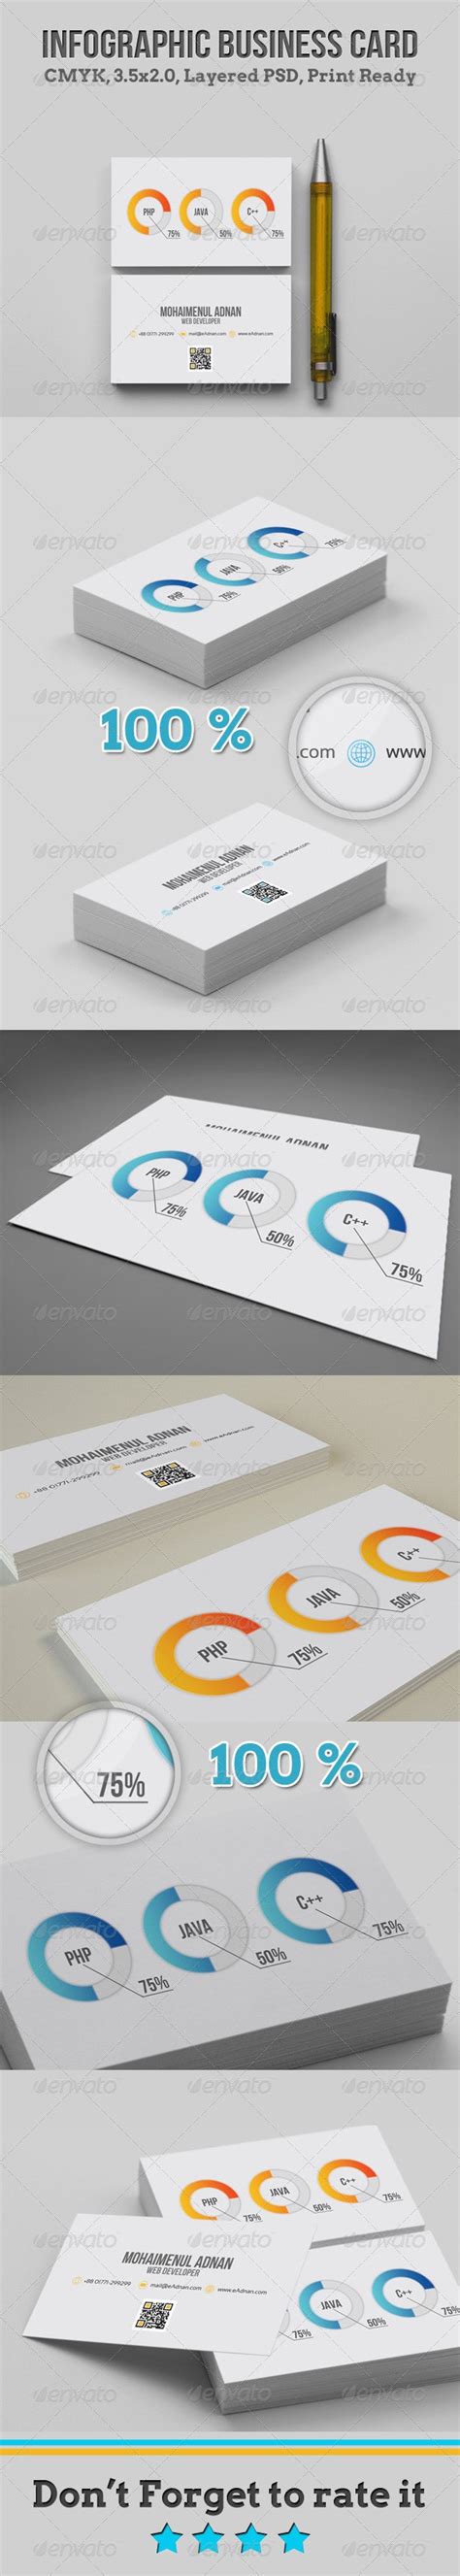 Infographic Business Card By Rtralrayhan Graphicriver